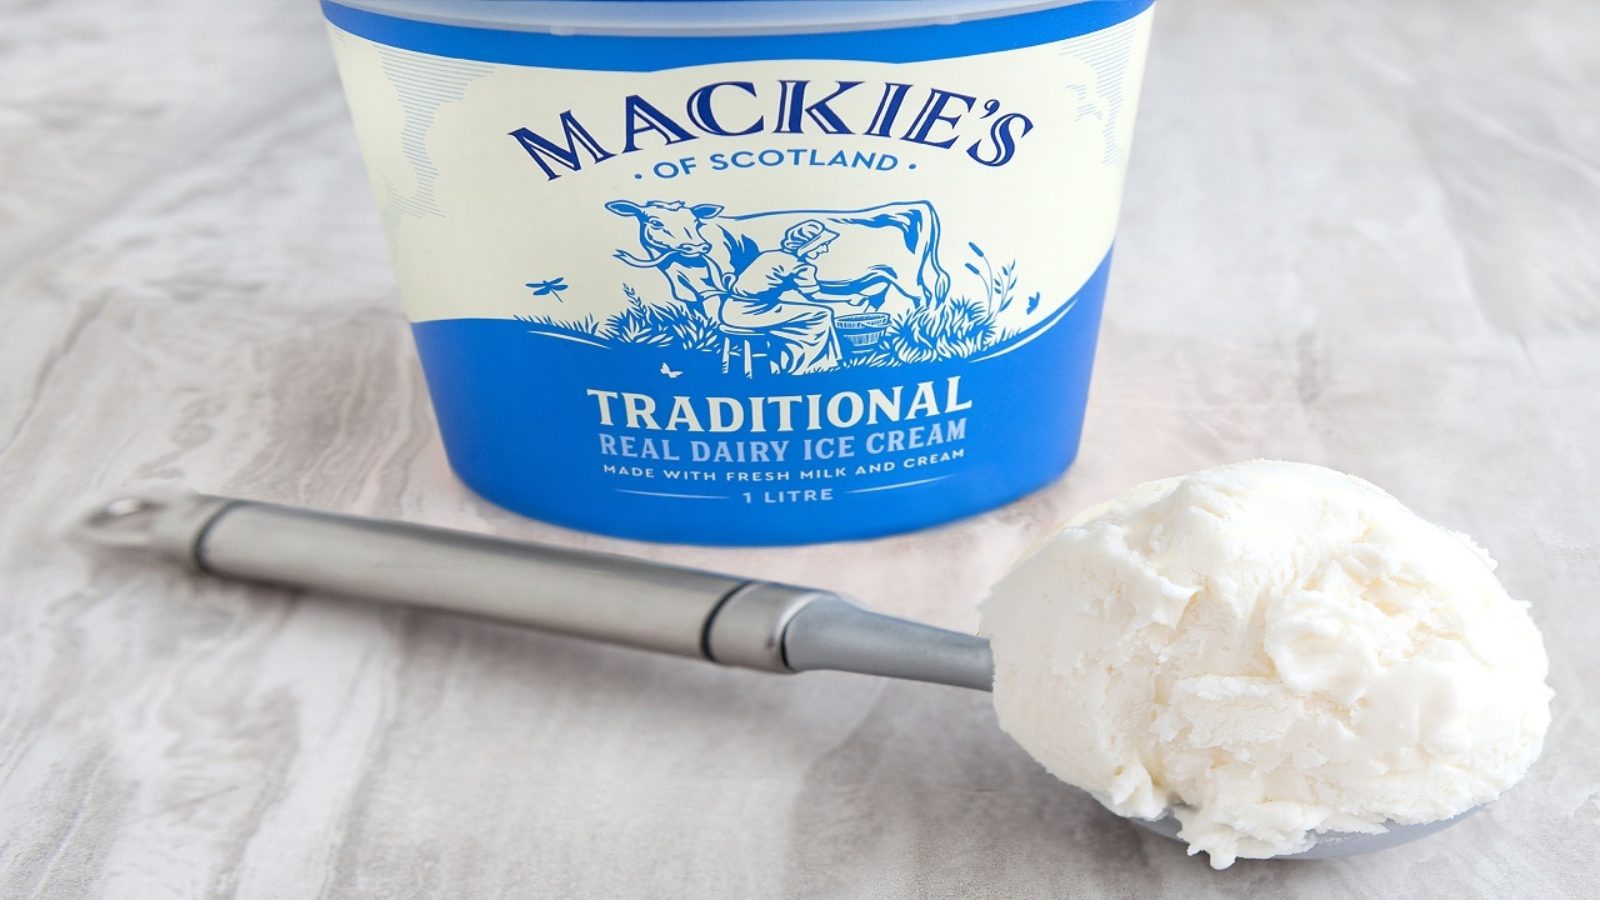 Ice cream brand expands landmark deal with Marks and Spencer’s